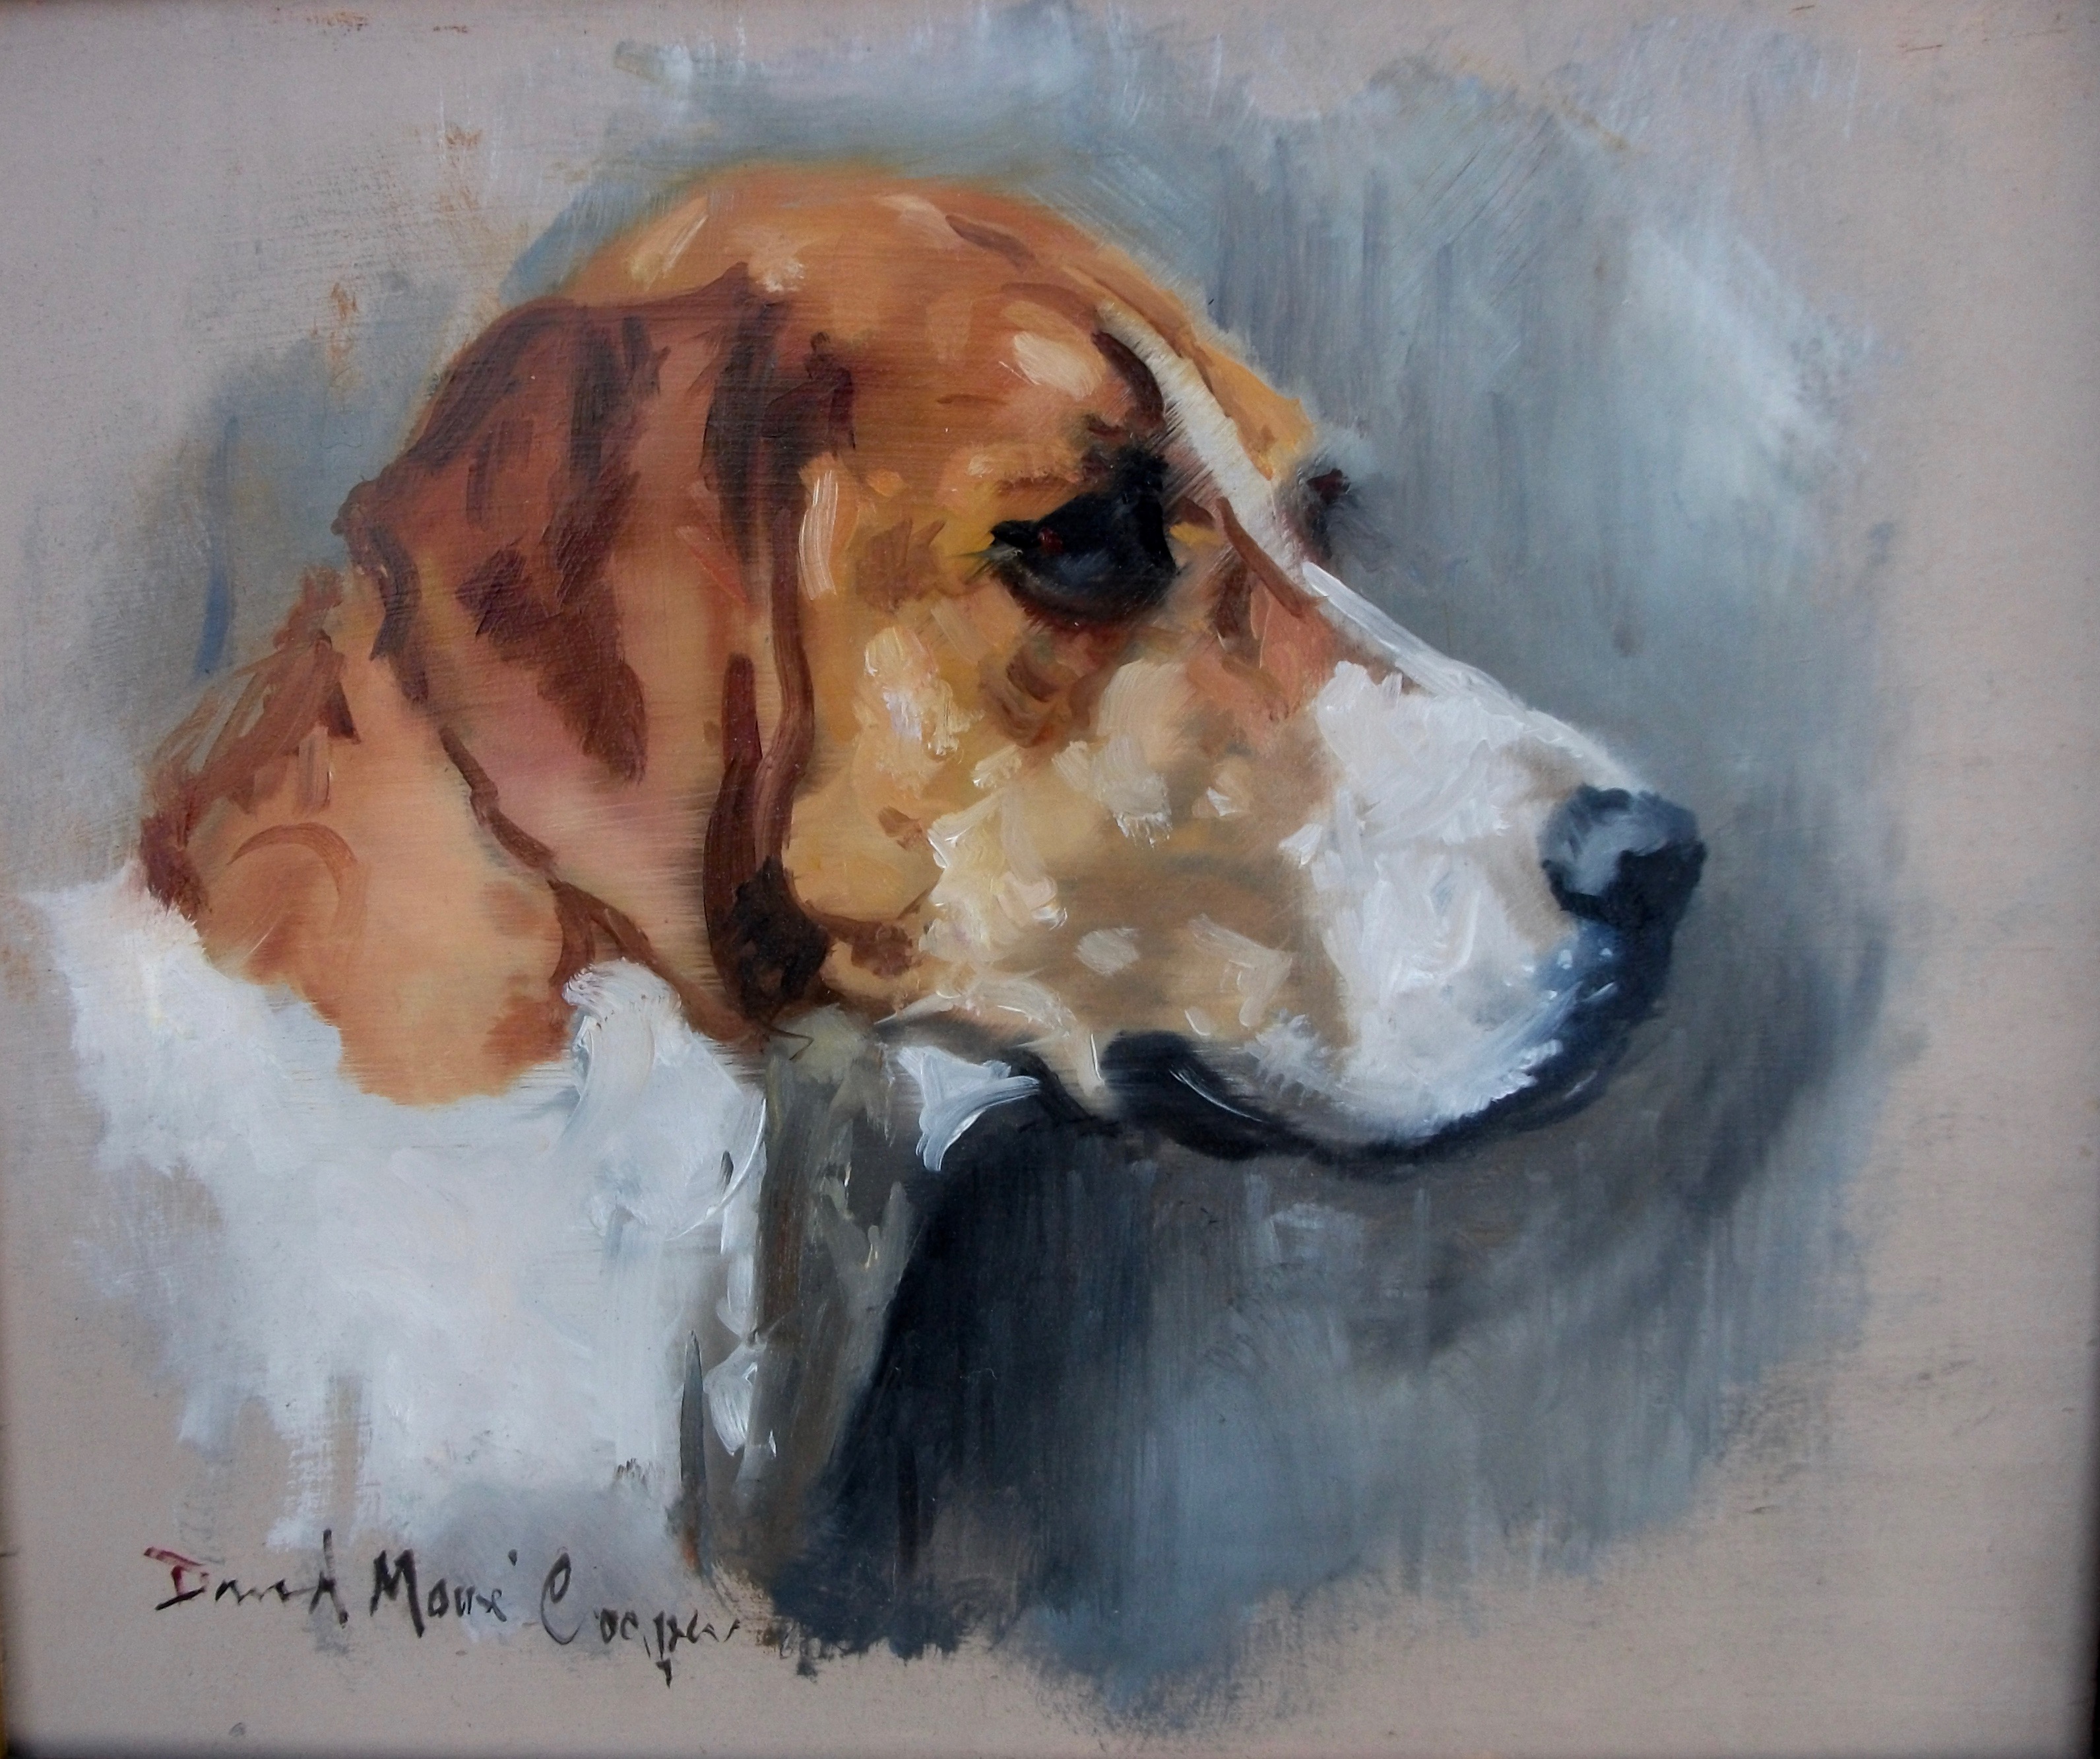 "Head of a Hound" by David 'Mouse' Cooper.